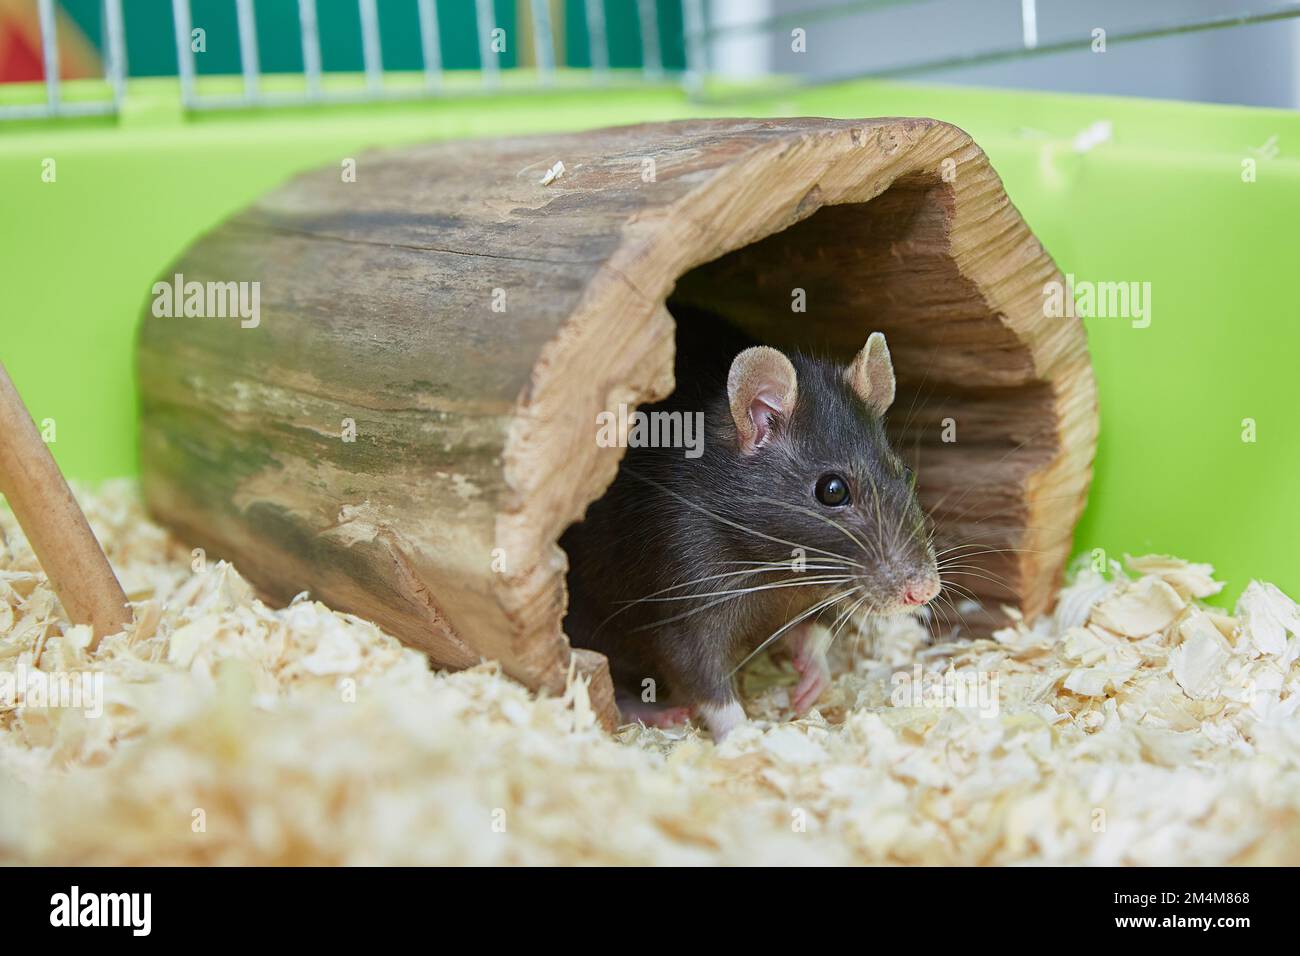 Black rat Rattus rattus in a cute wooden house in a cage. domestic rat and pets. Stock Photo